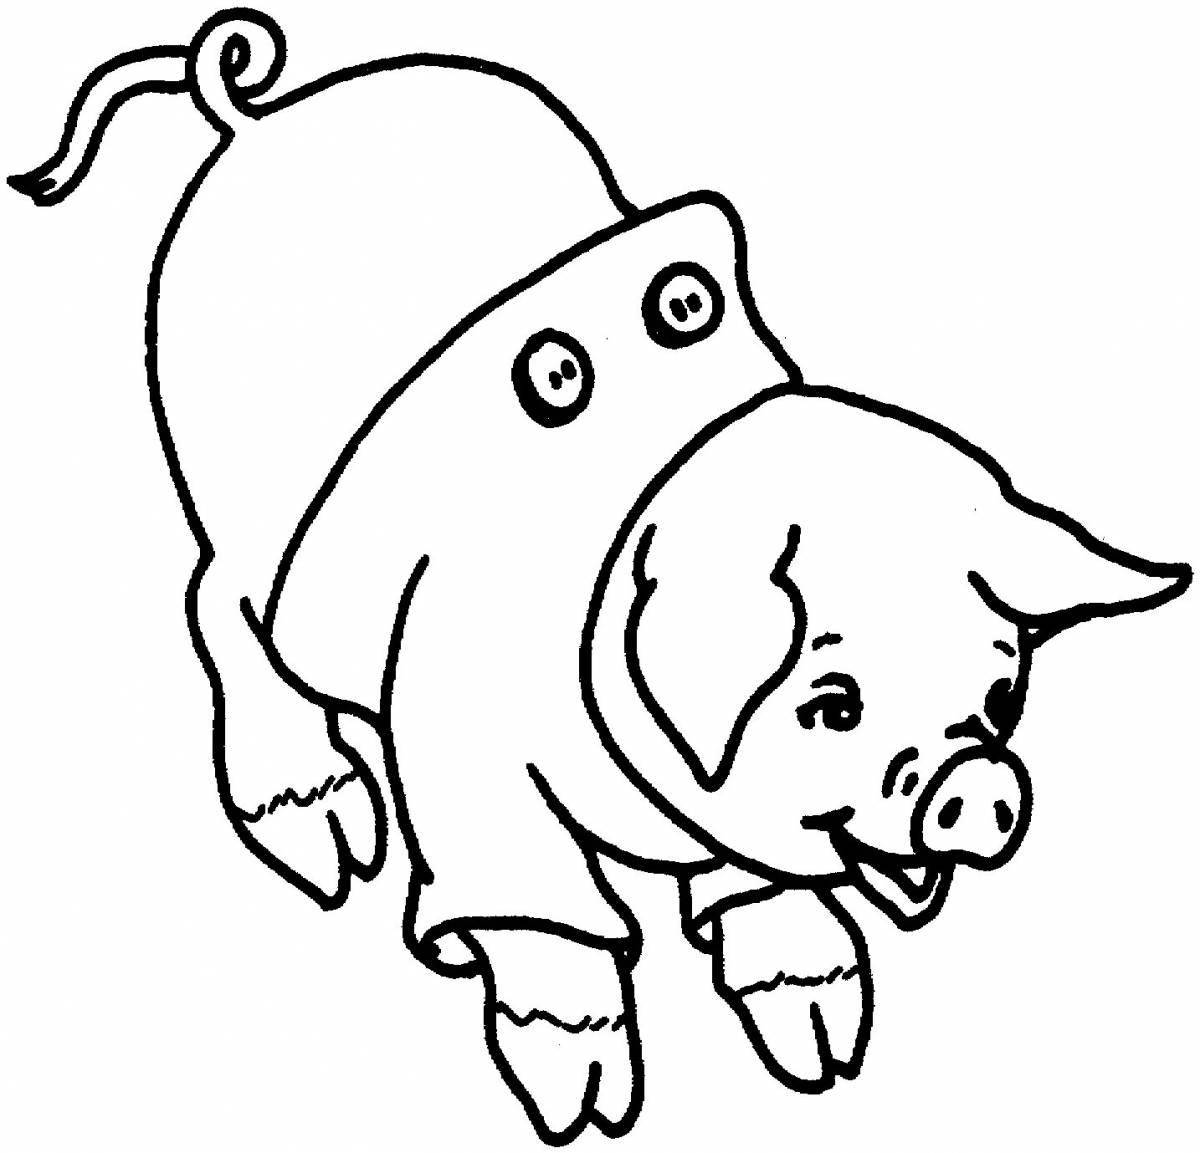 An interesting pig coloring book for kids